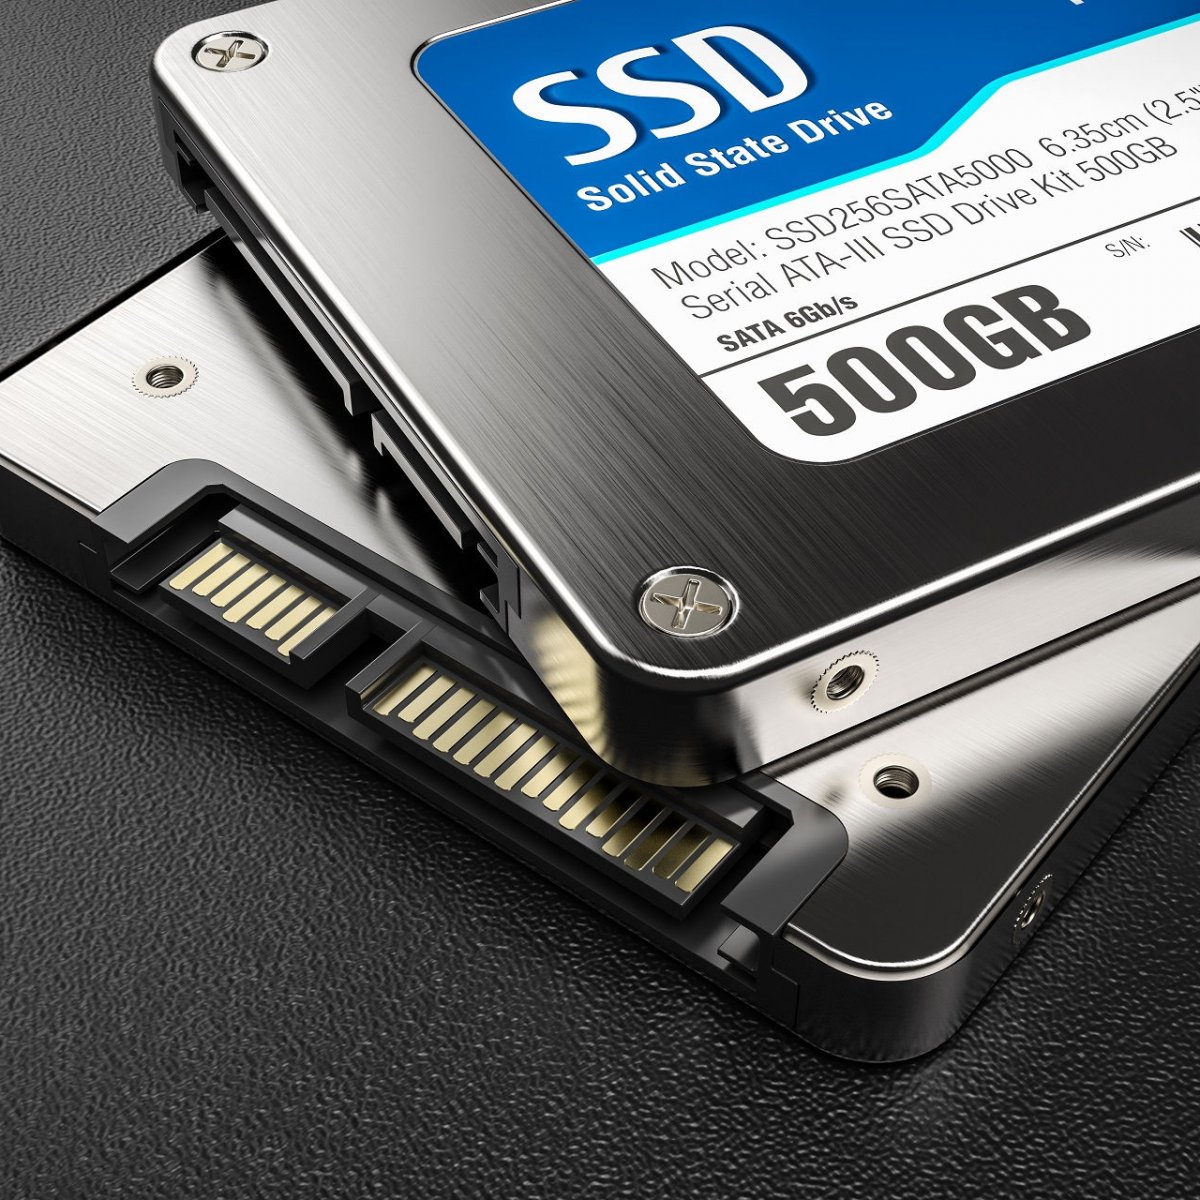 What to do if can't install Windows 10/11 on SSD [FIX]